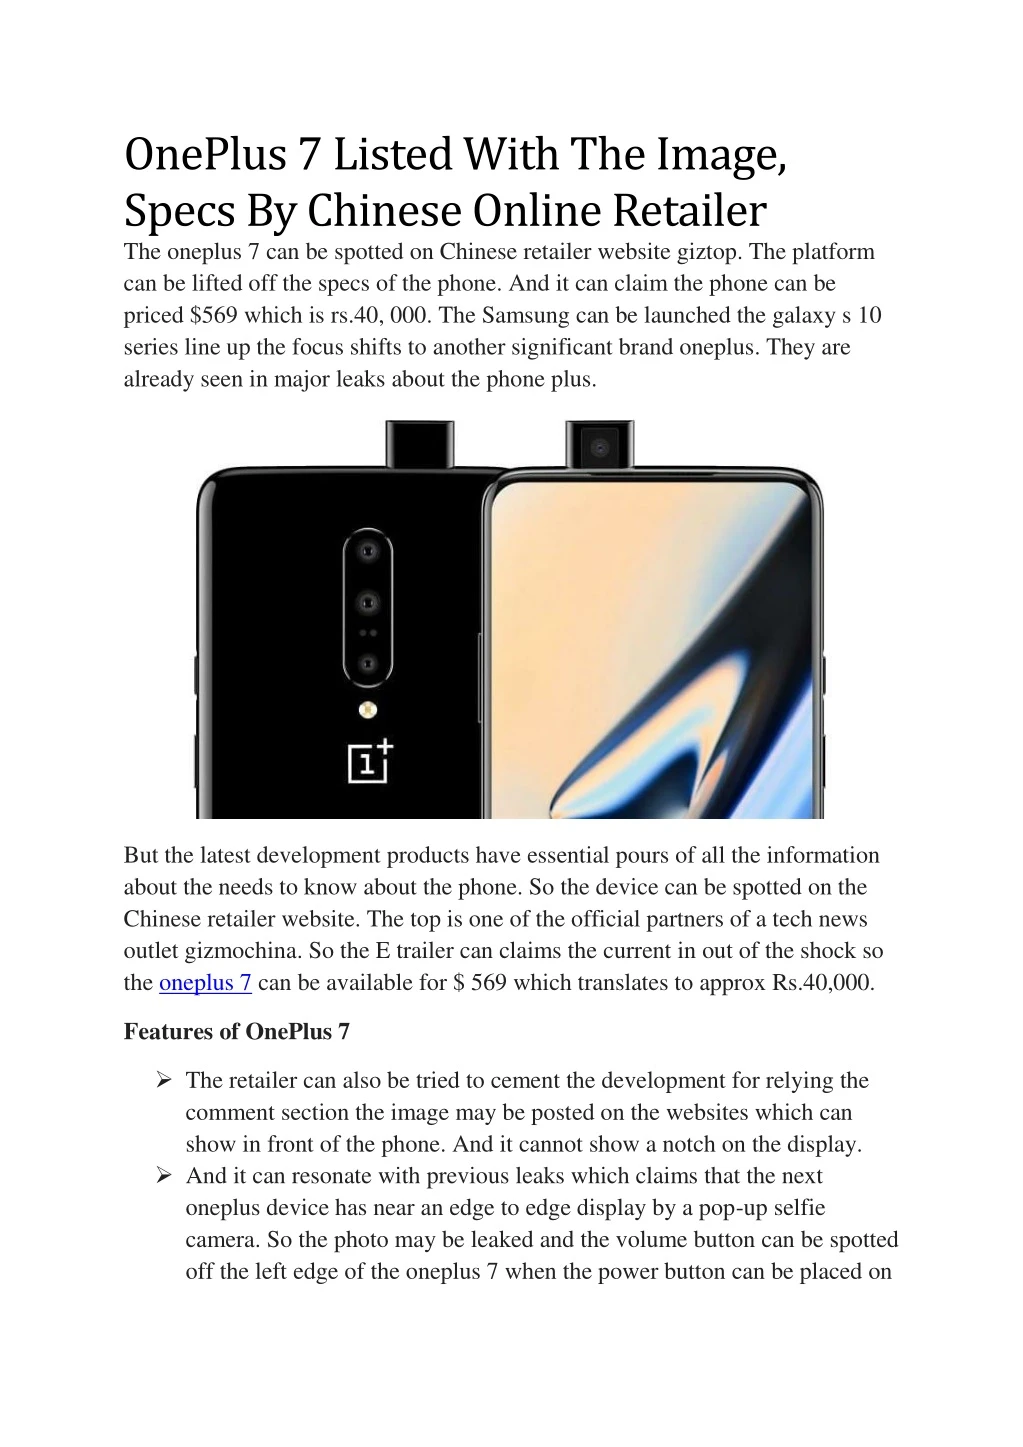 oneplus 7 listed with the image specs by chinese